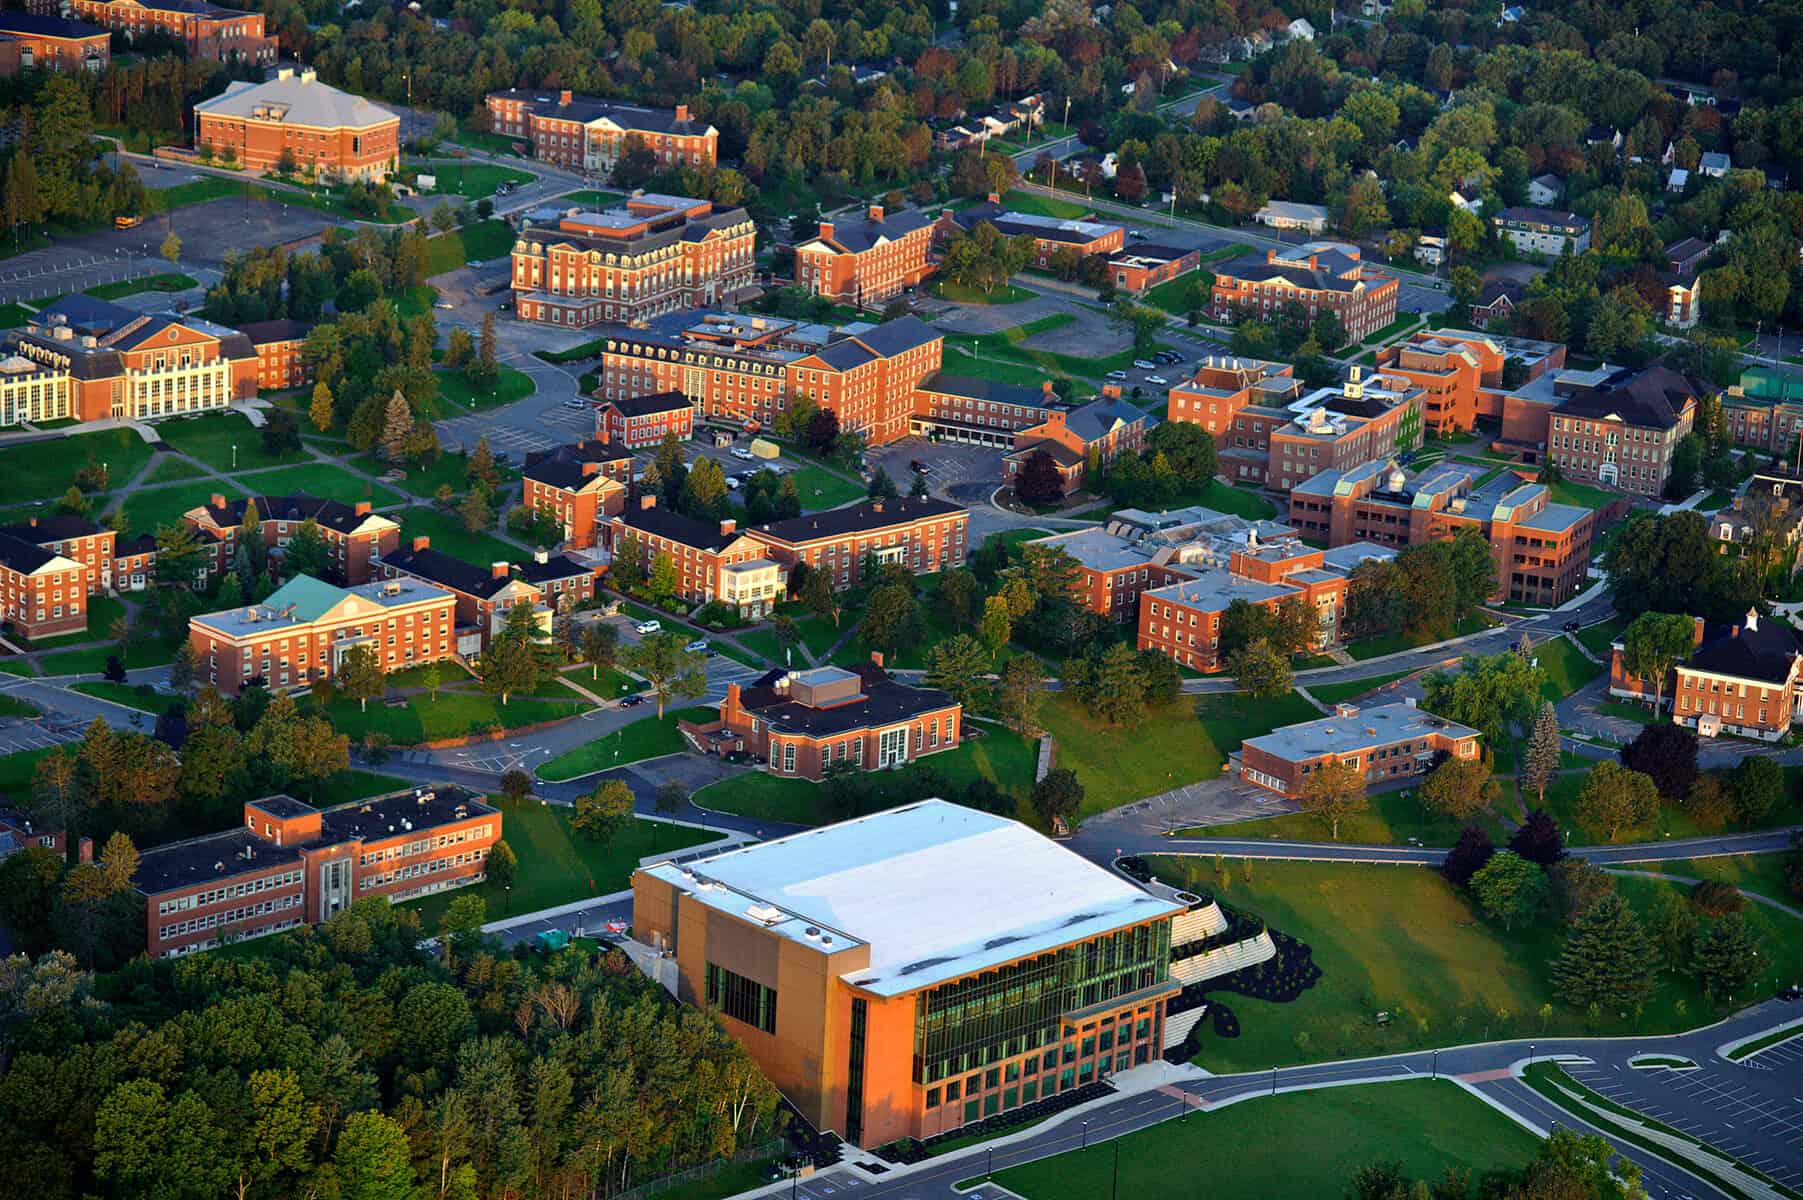 An aerial shot of the University of New Brunswick's campus.